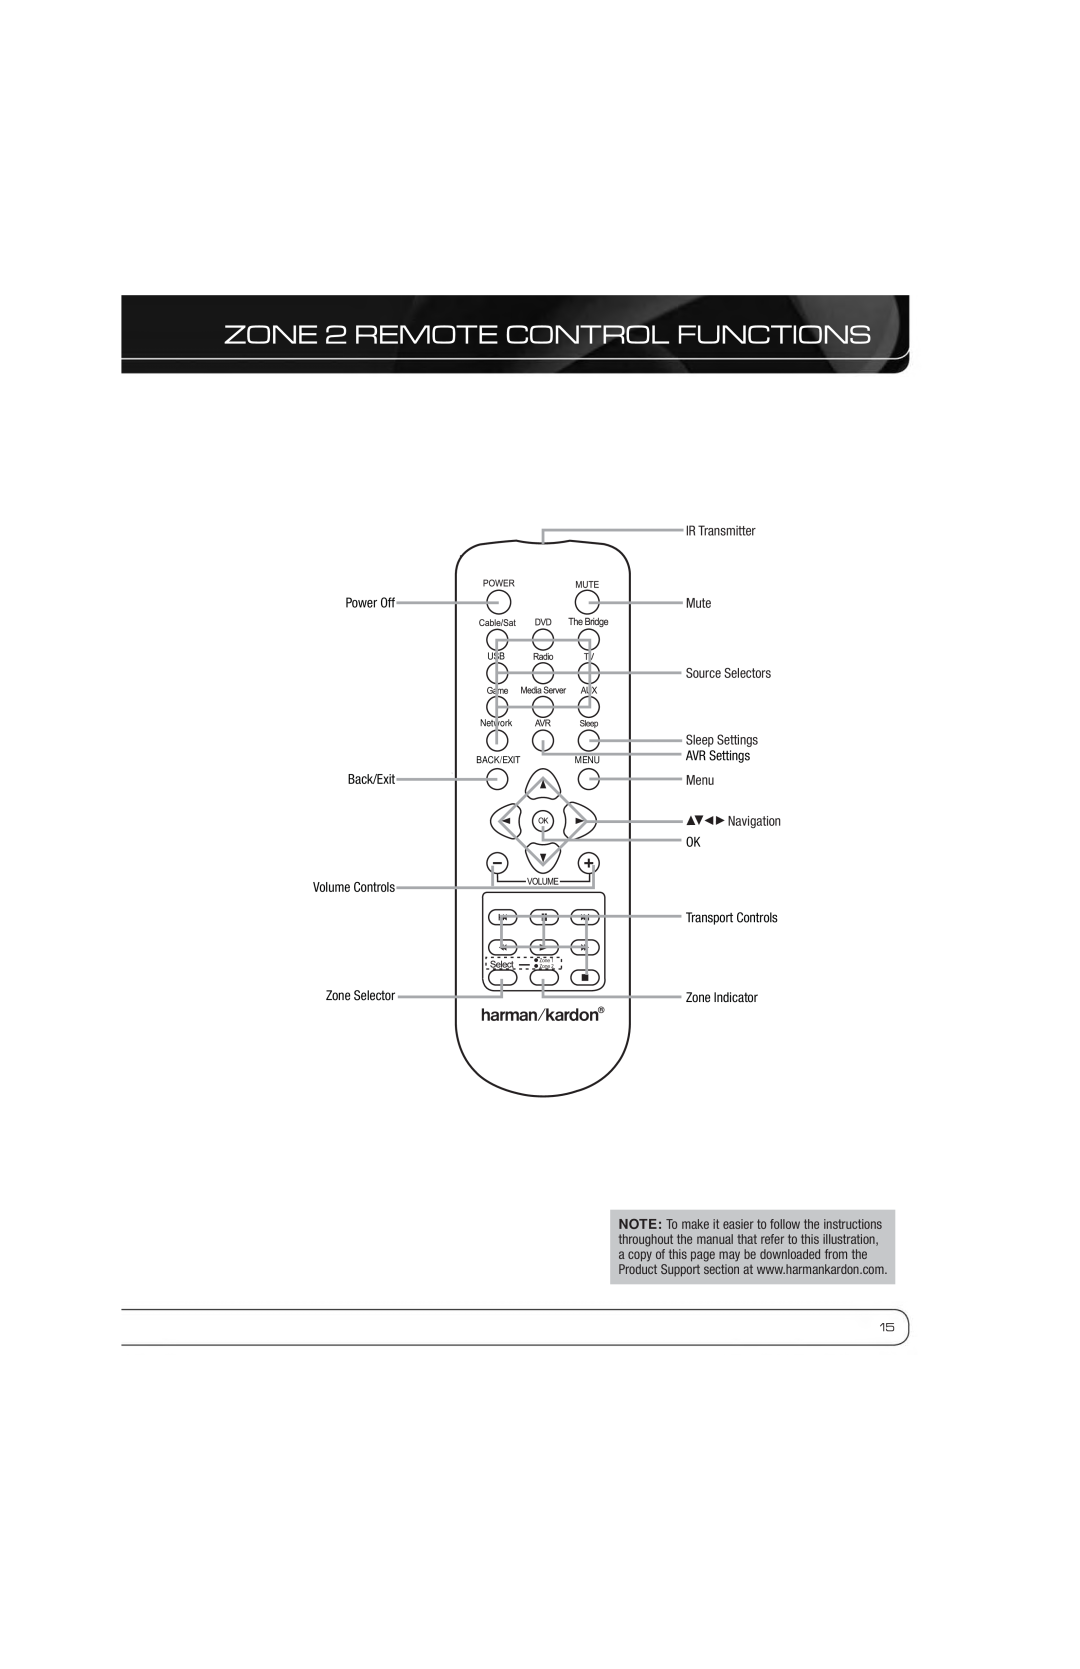 Harman-Kardon AVR 7550HD ZONE 2 REMOTE CONTROL FUNCTIONS, Power Off Back/Exit Volume Controls Zone Selector, AVR Settings 